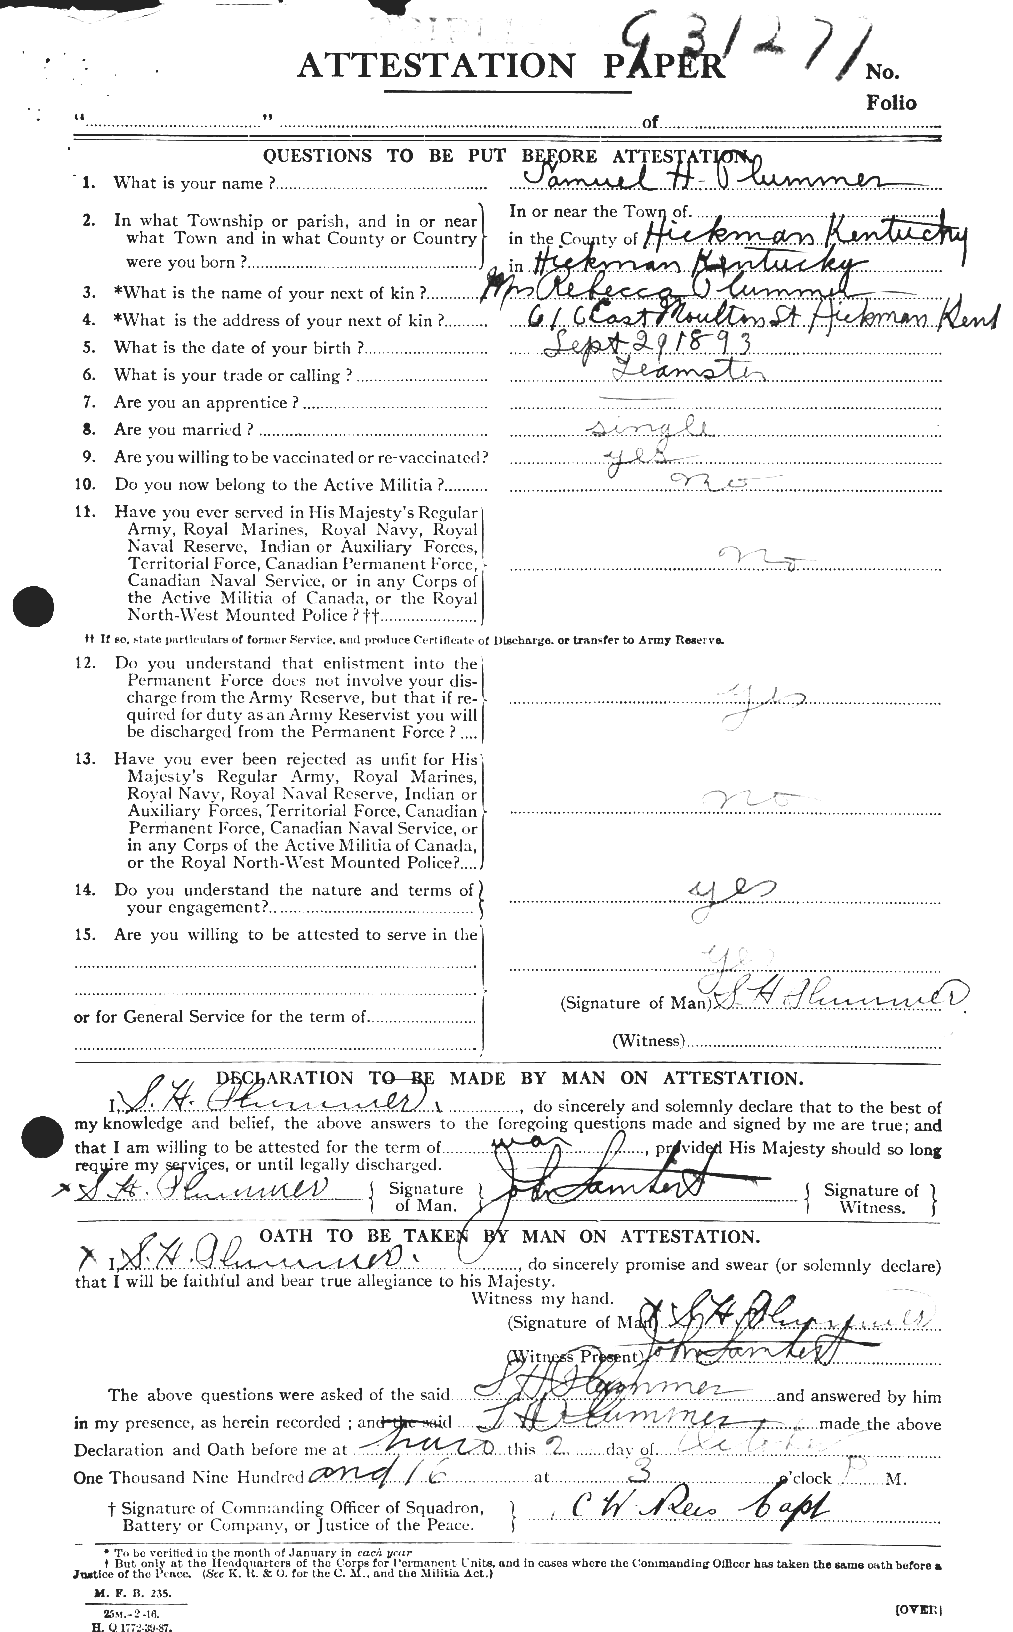 Personnel Records of the First World War - CEF 578547a